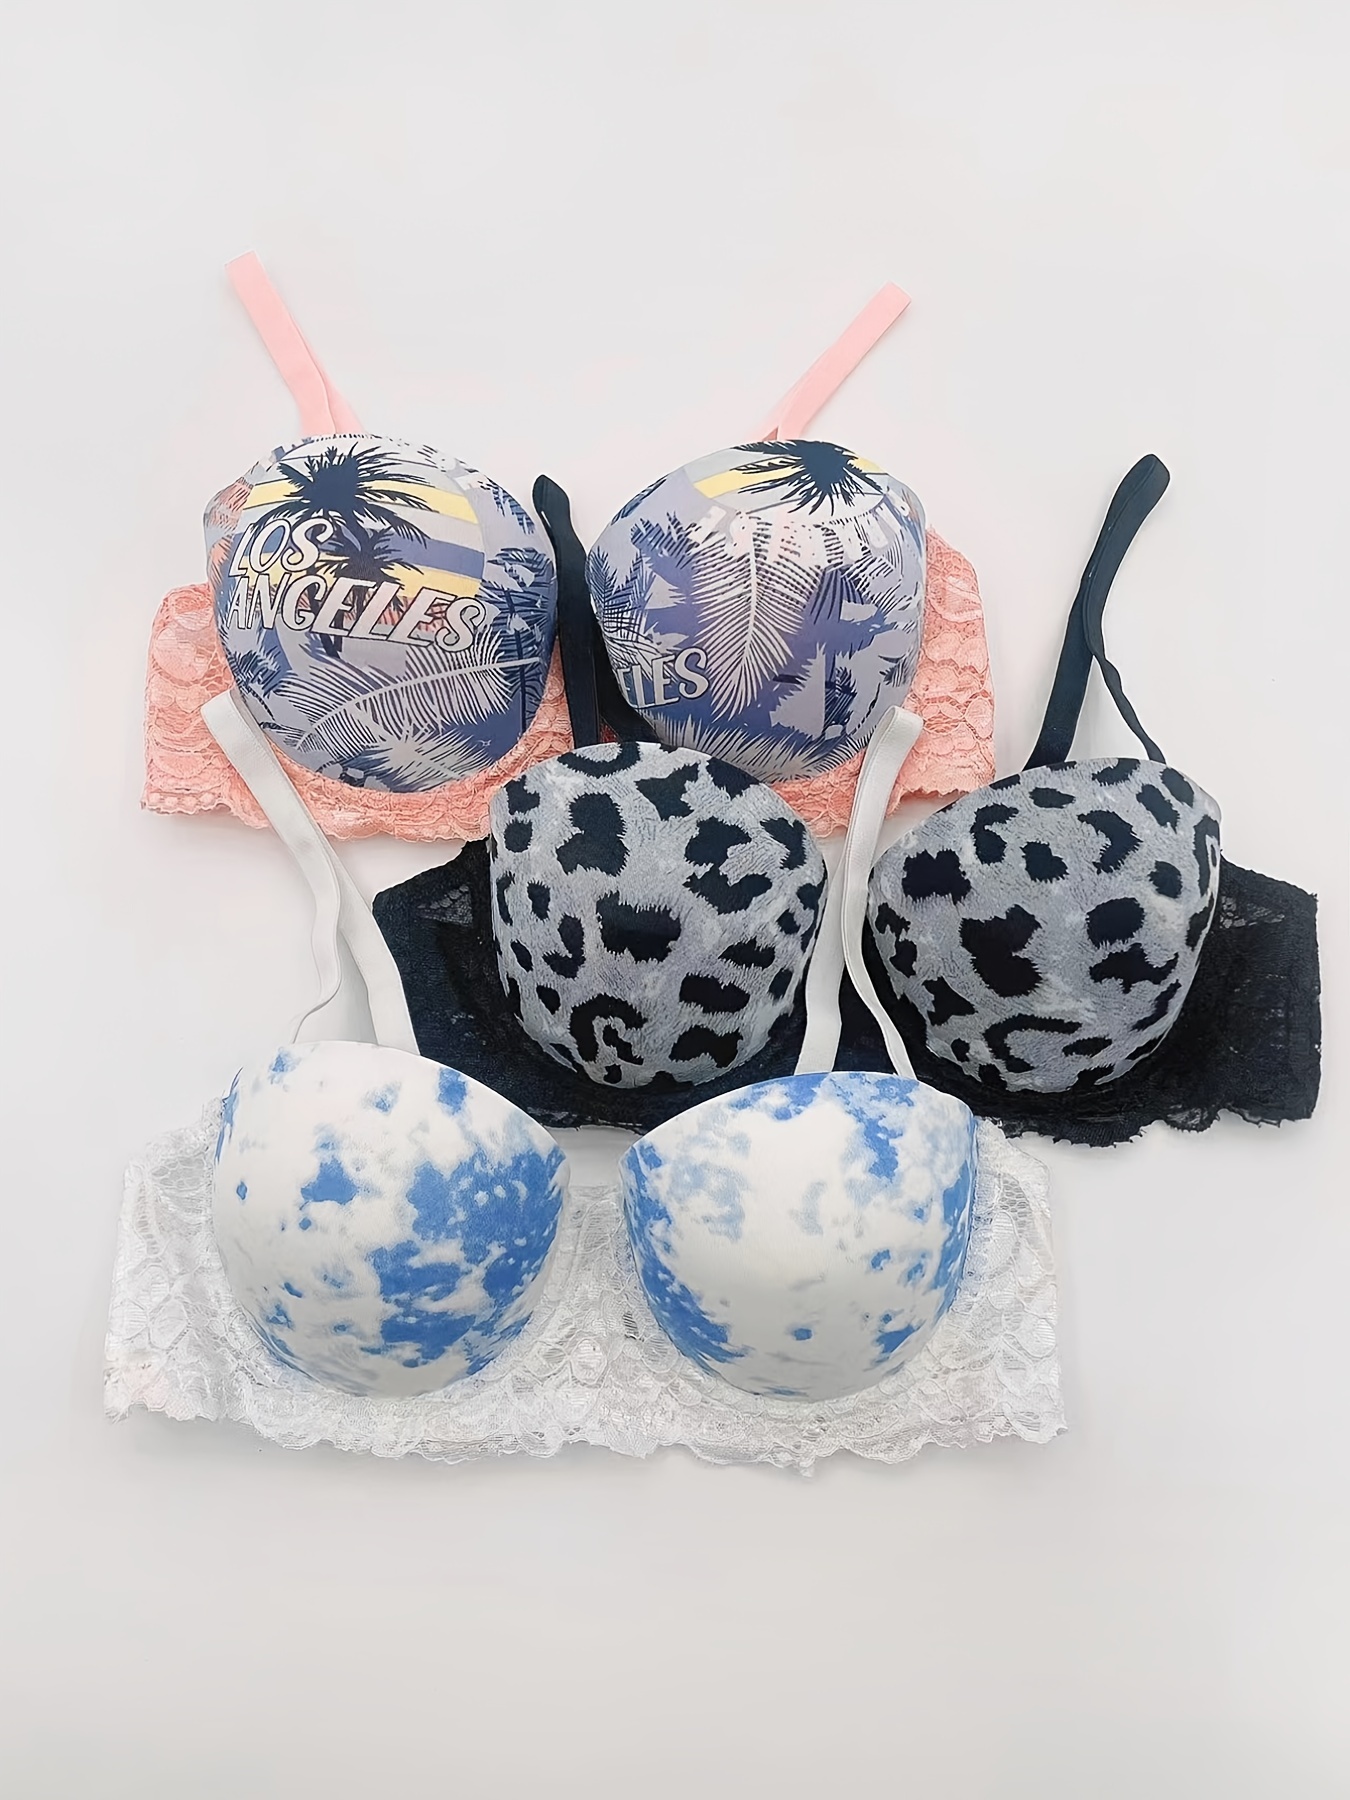 Clearance!Female Bra and Panty Set Floral Lace Two Piece Bralette Lingerie  Set Push Up Bra Set Lace Underwear Set Underwire Brassiere Outf